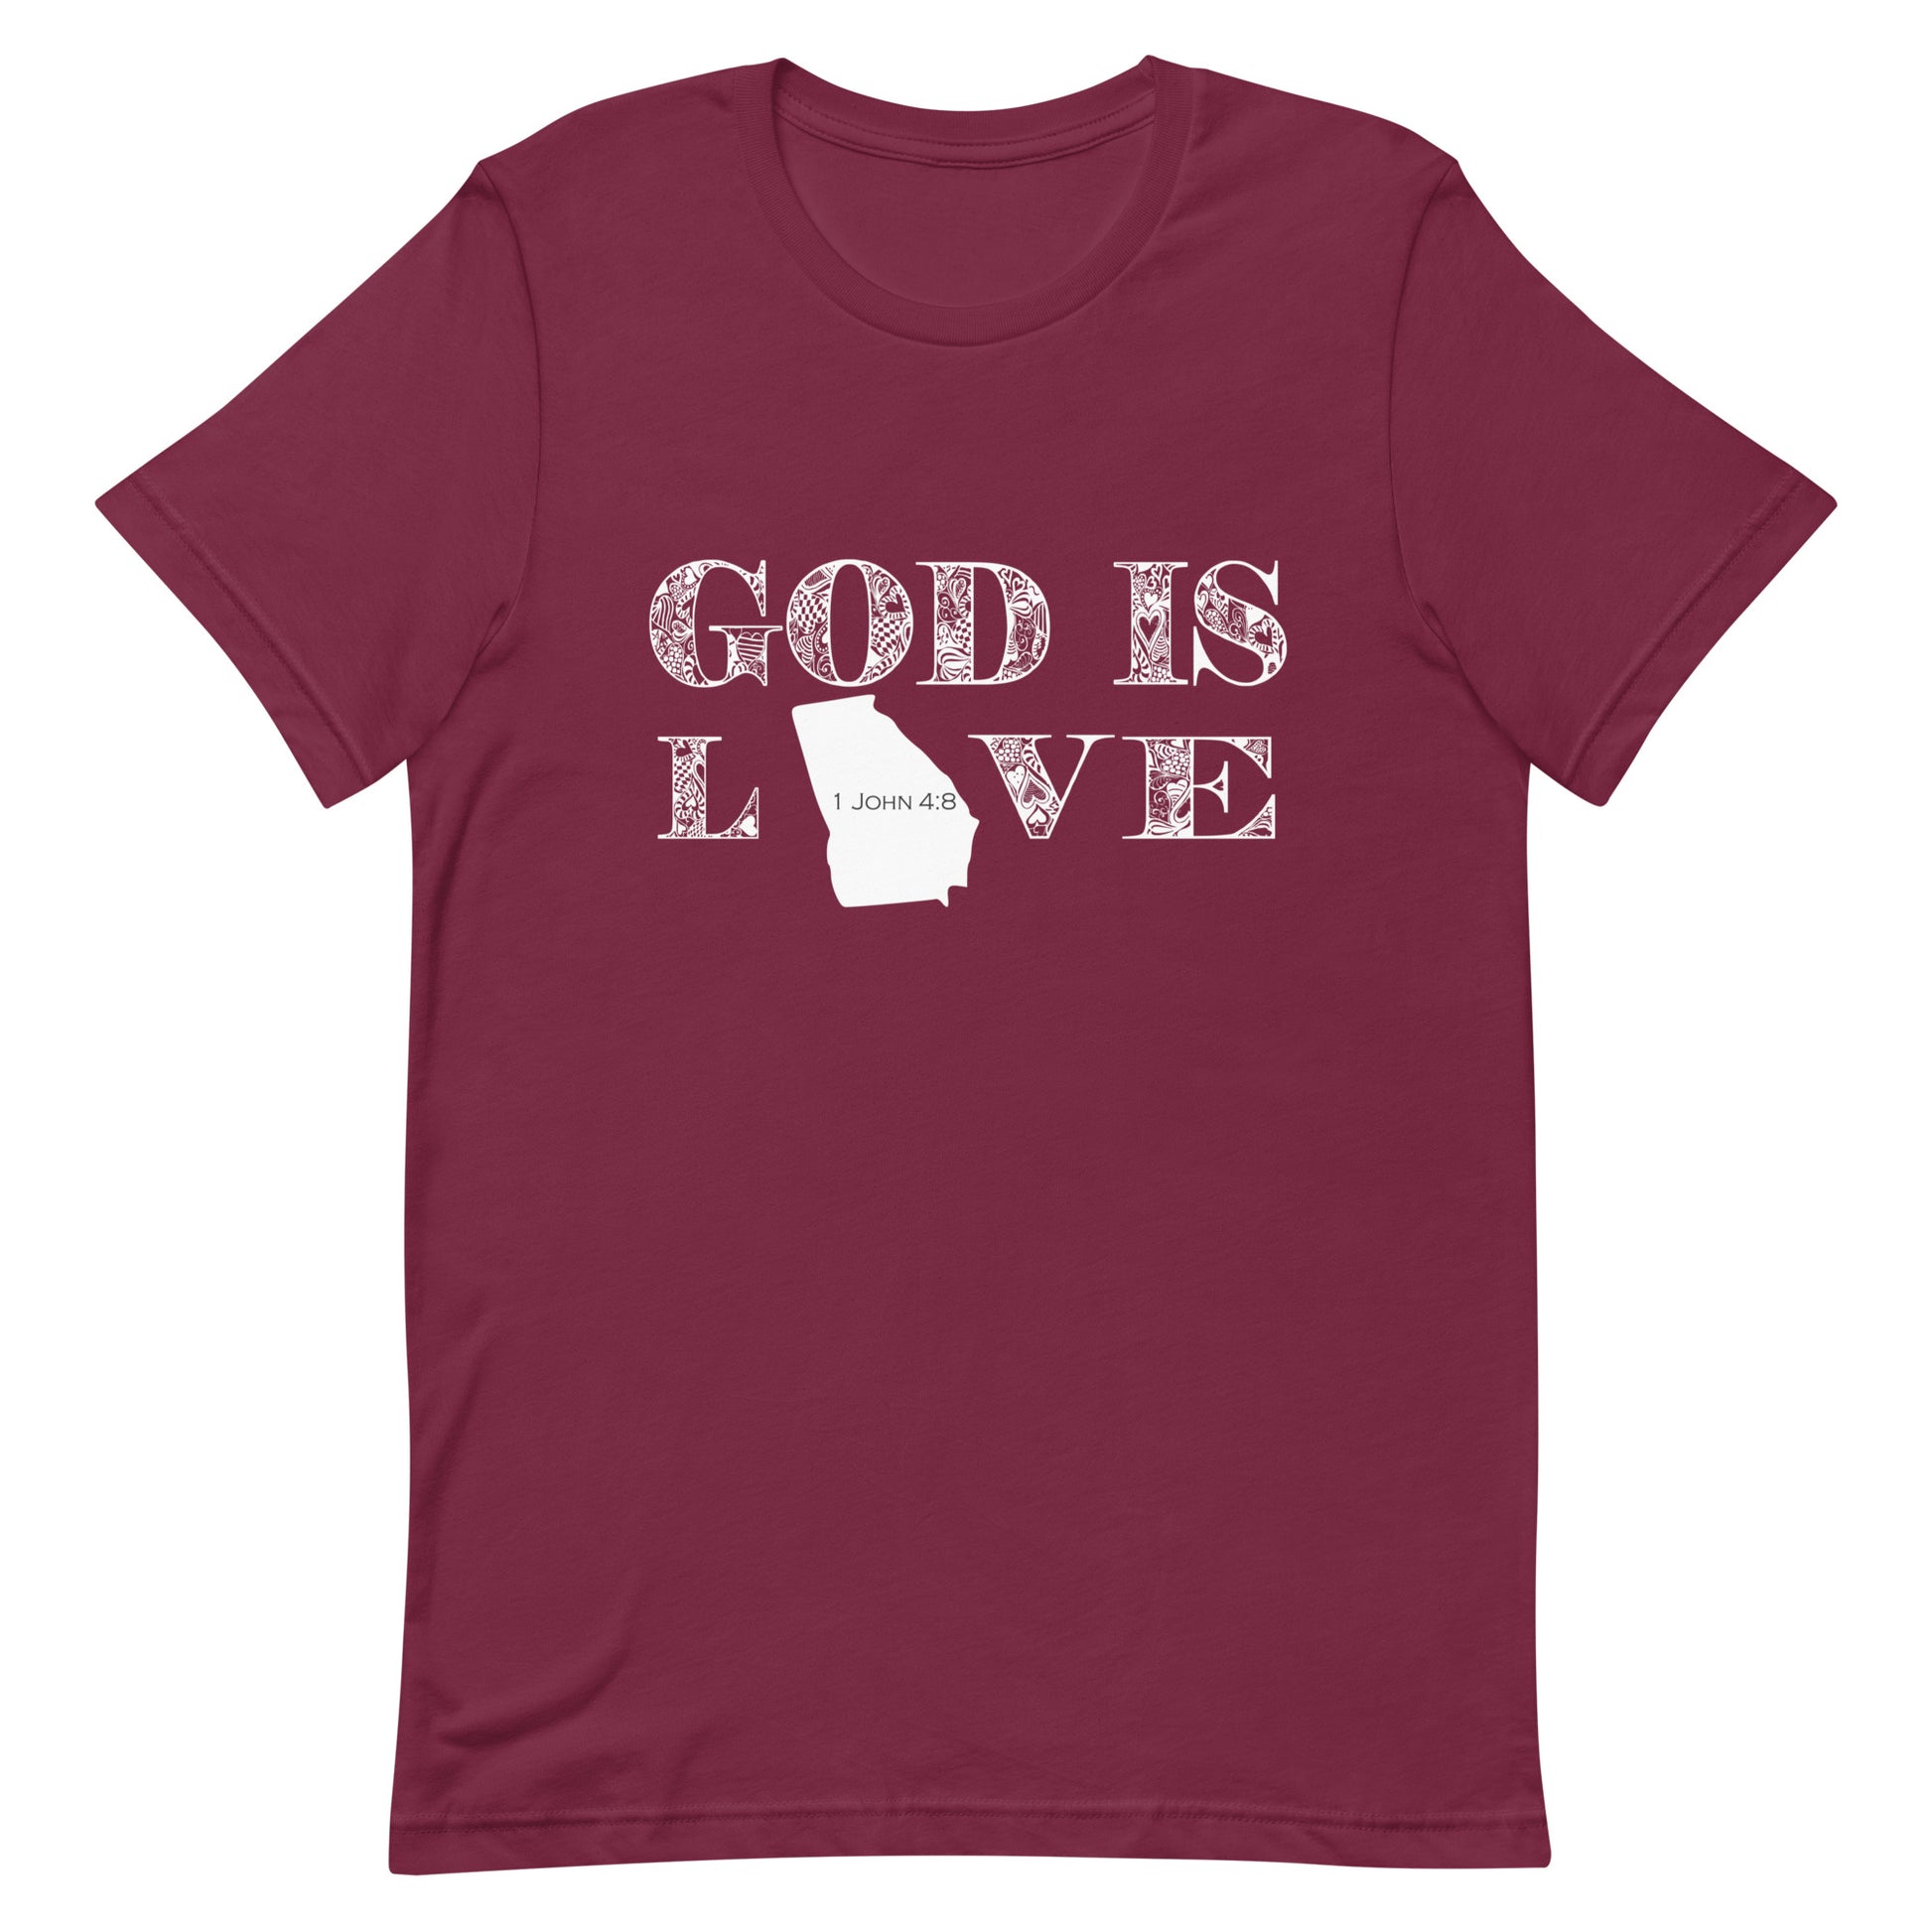 1 John 4:8 God is love Georgia T-shirt in Maroon - front view